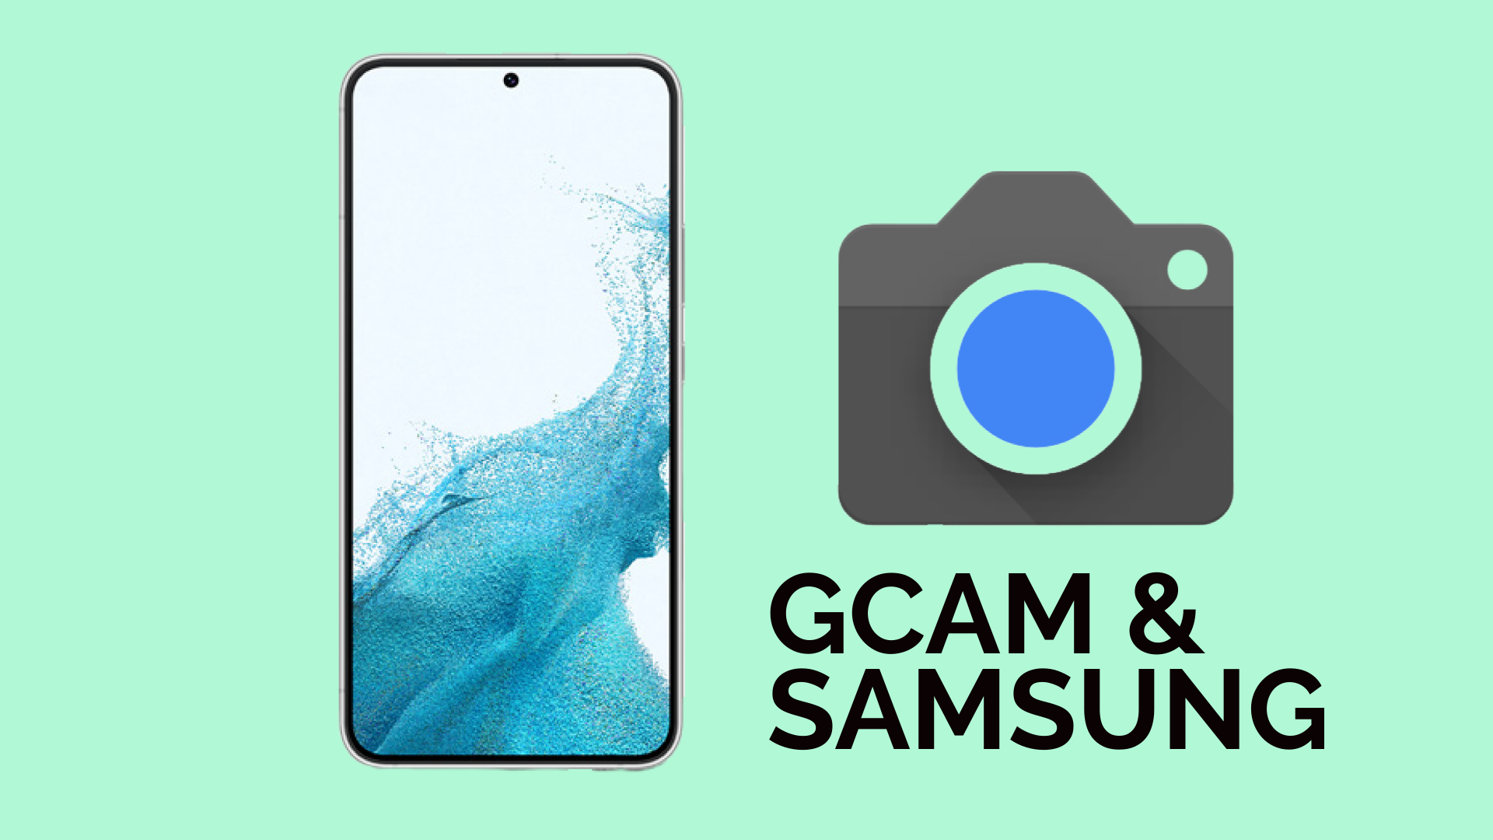 Download GCAM 8.4 APK For All Samsung Galaxy Devices [Exynos and Snapdragon]